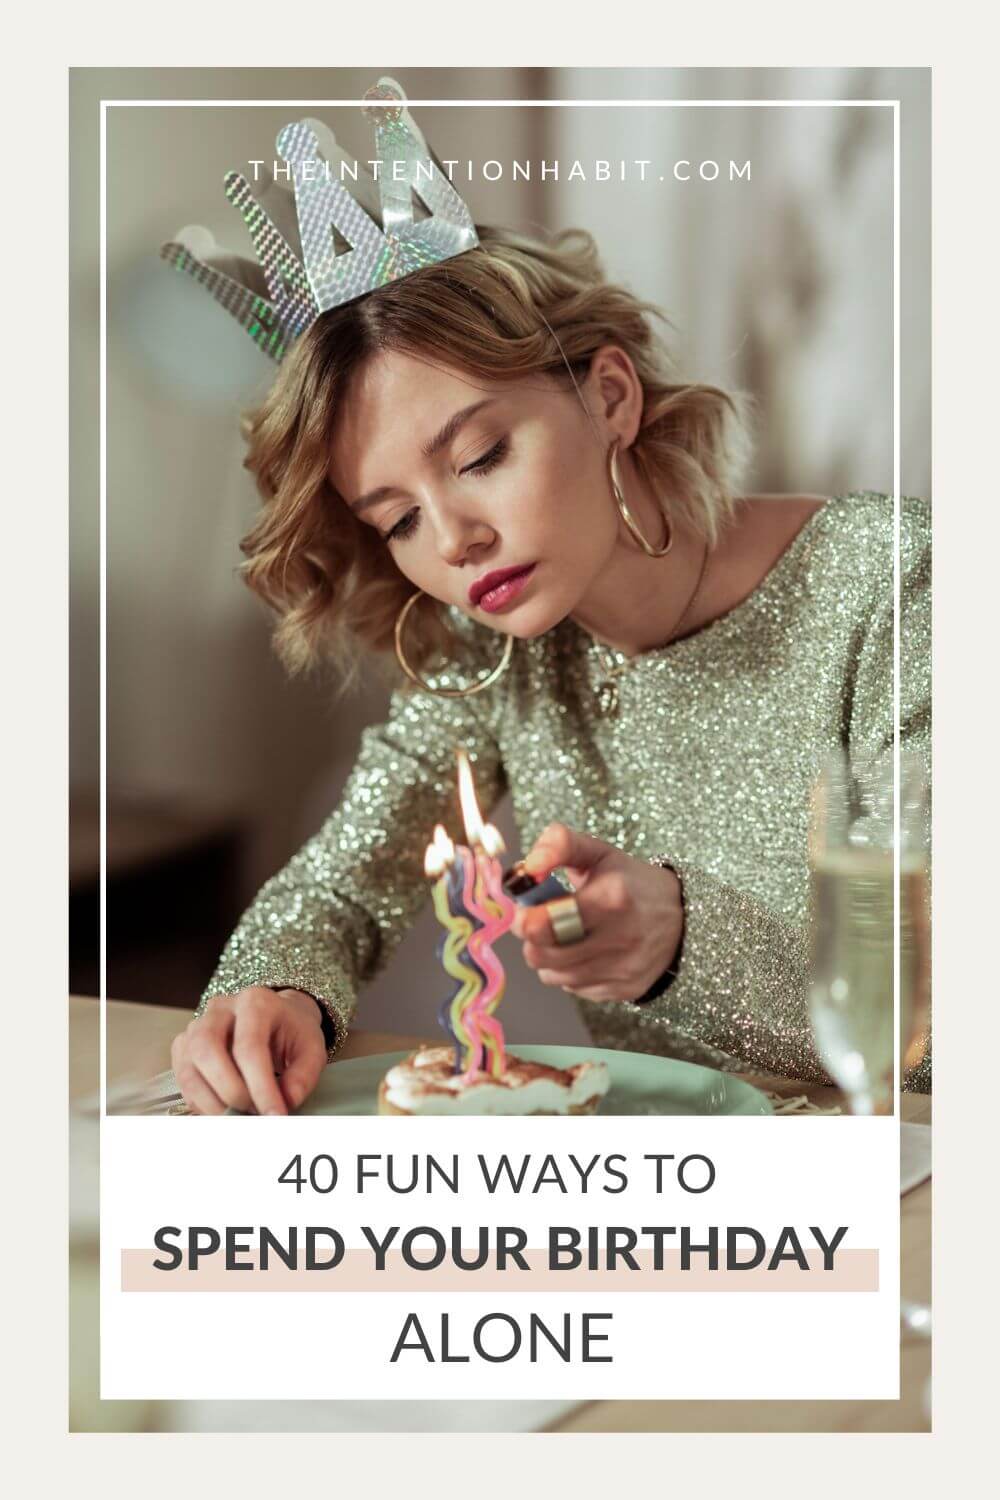 40 fun ways how to celebrate your birthday alone with woman lighting candles wearing party crown.